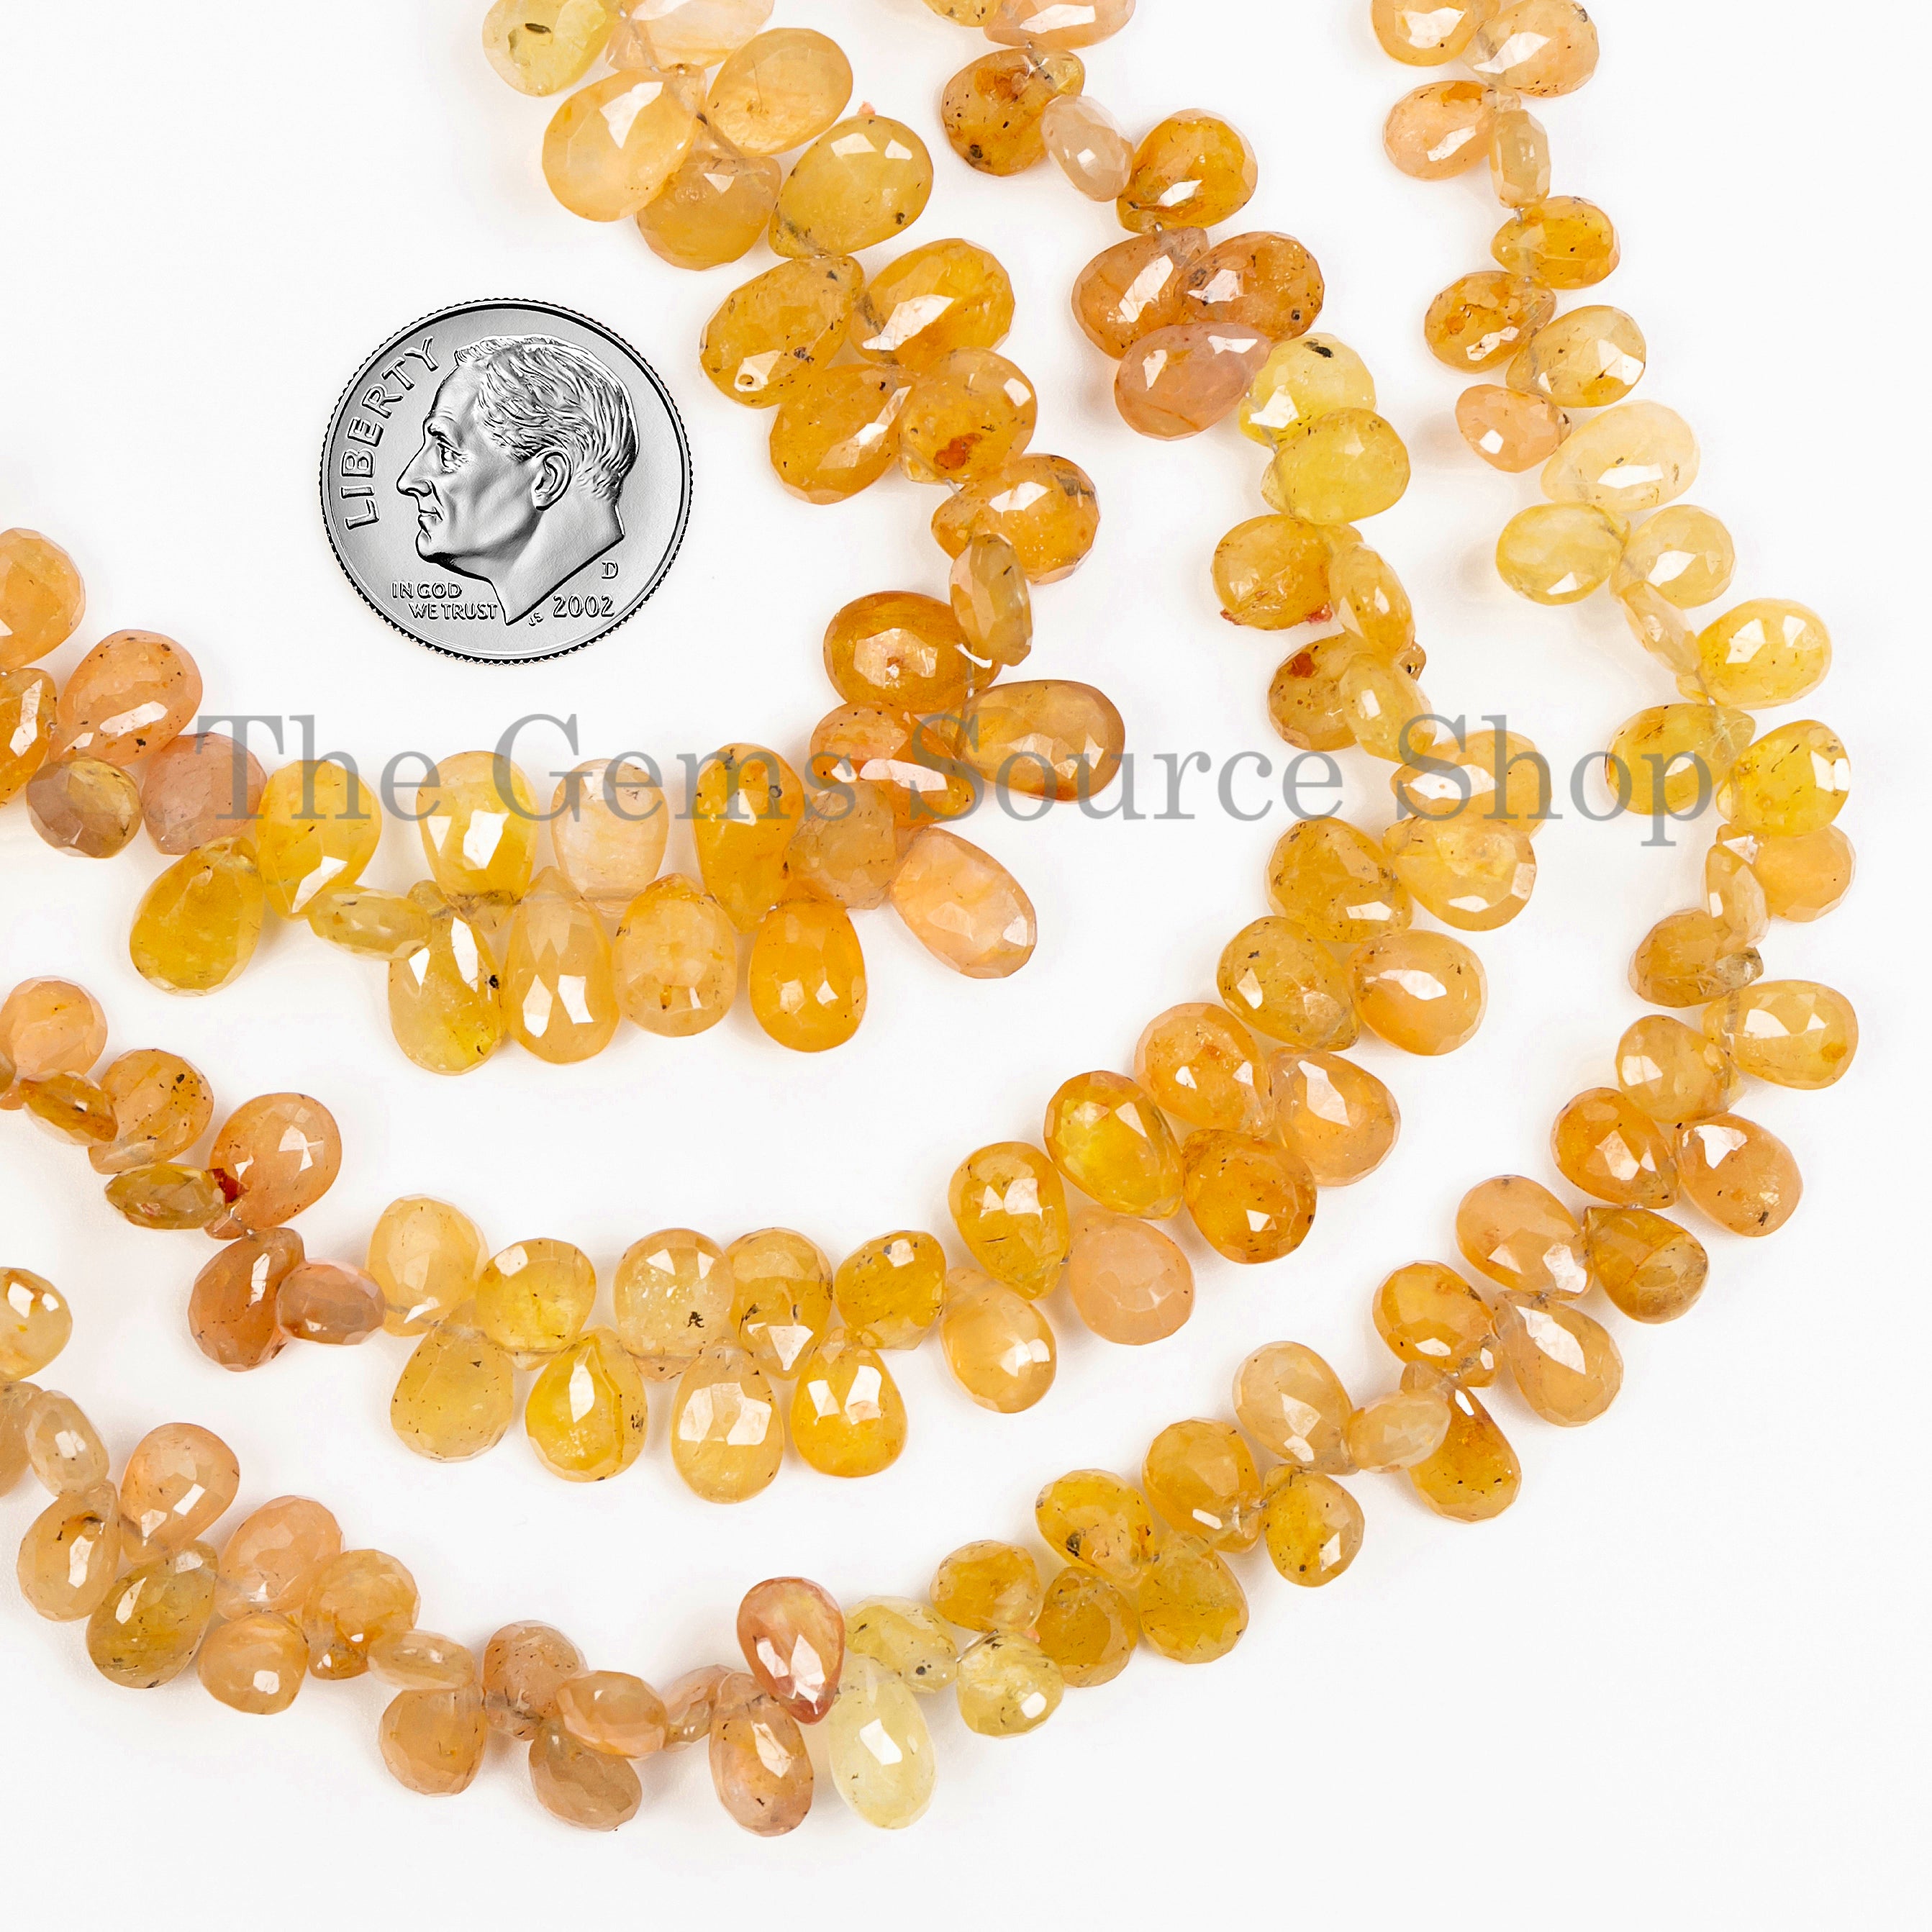 Yellow Sapphire Faceted Pear Beads, 5X7-6X8mm Natural Sapphire Faceted Pear Shape Beads for Jewelry Making. TGS-5050